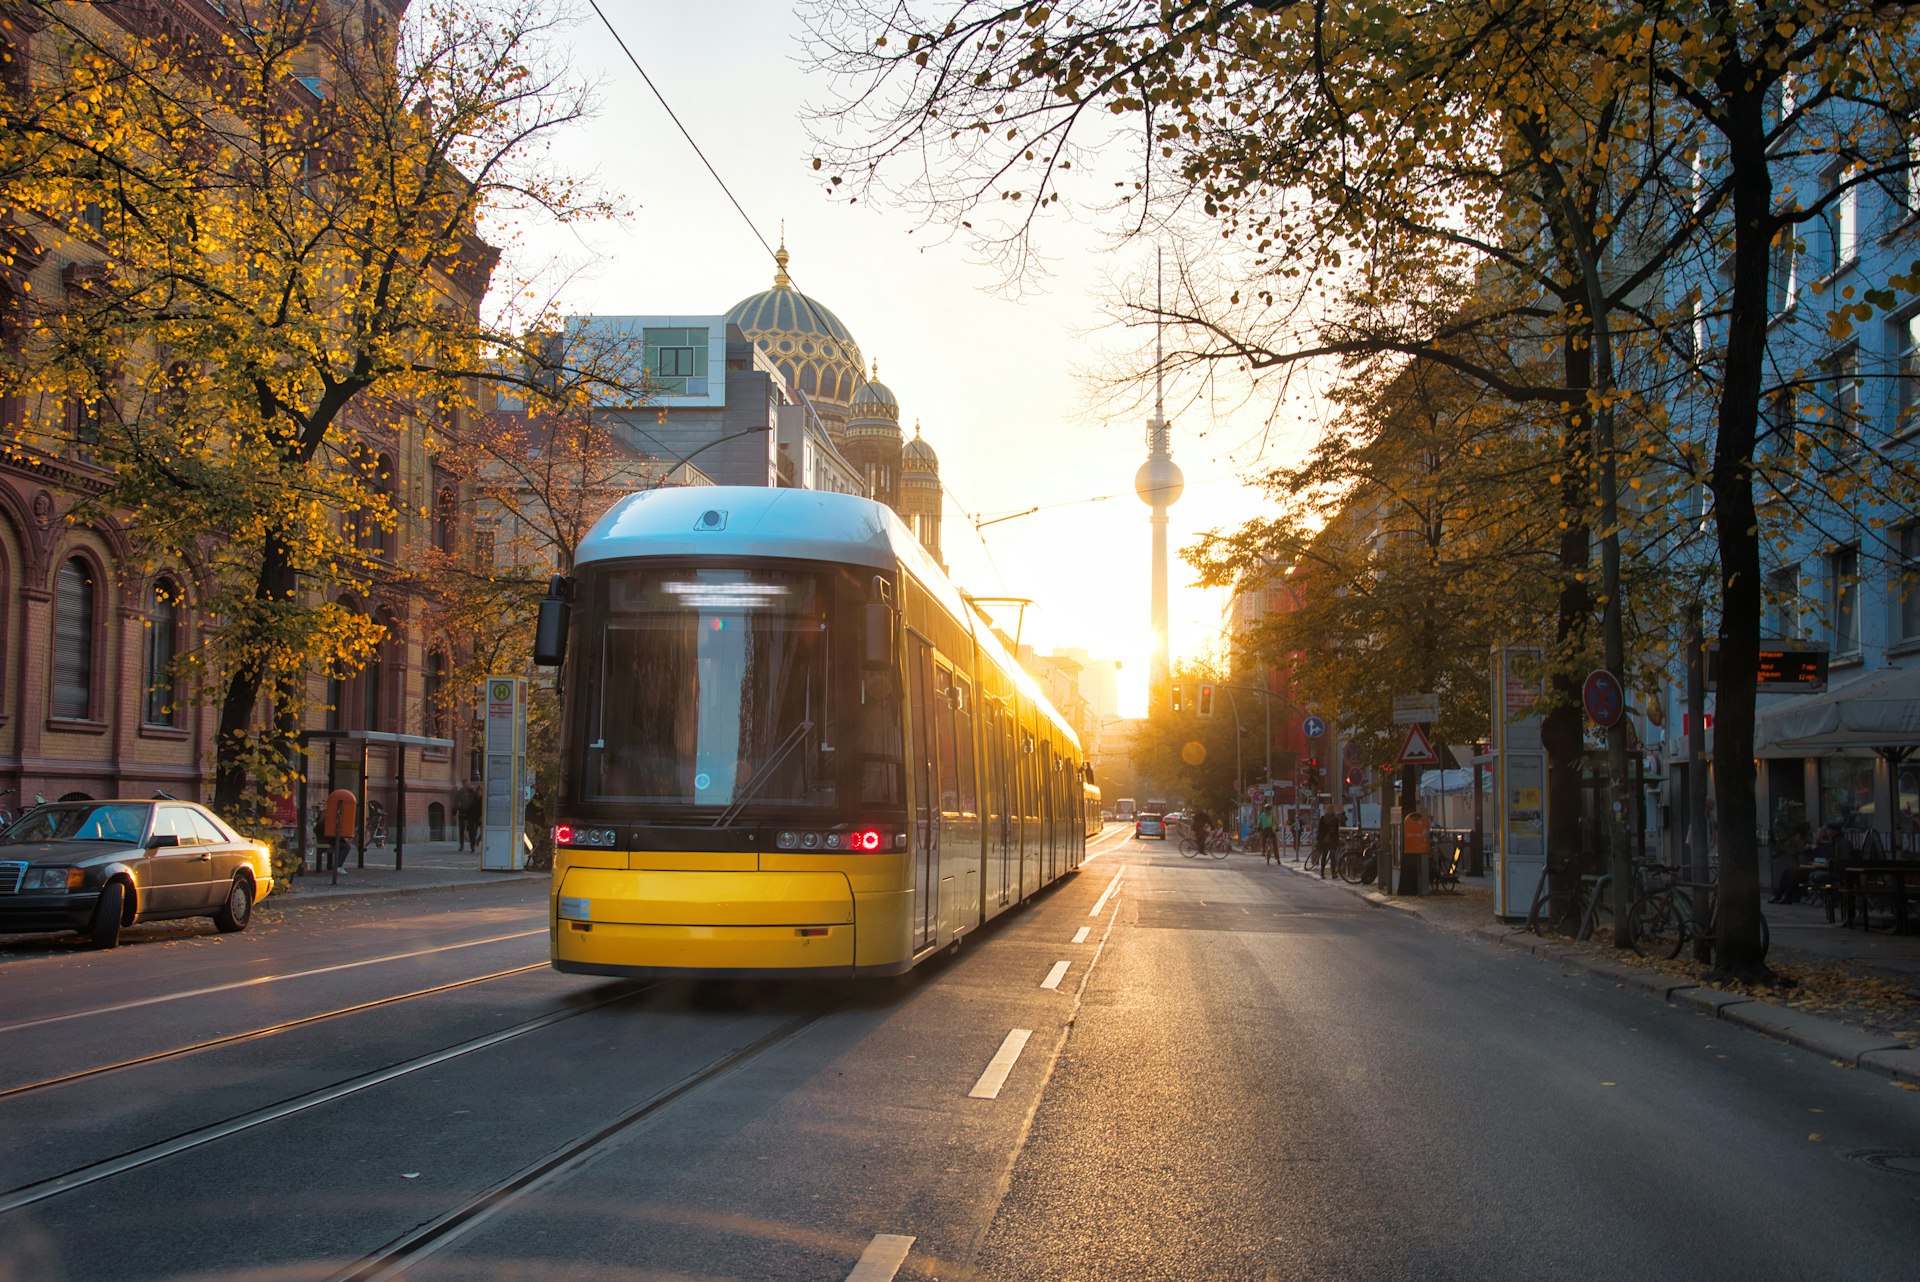 A yellow tram in the early morning sunlight along Berlin's Oranienburger Strasse